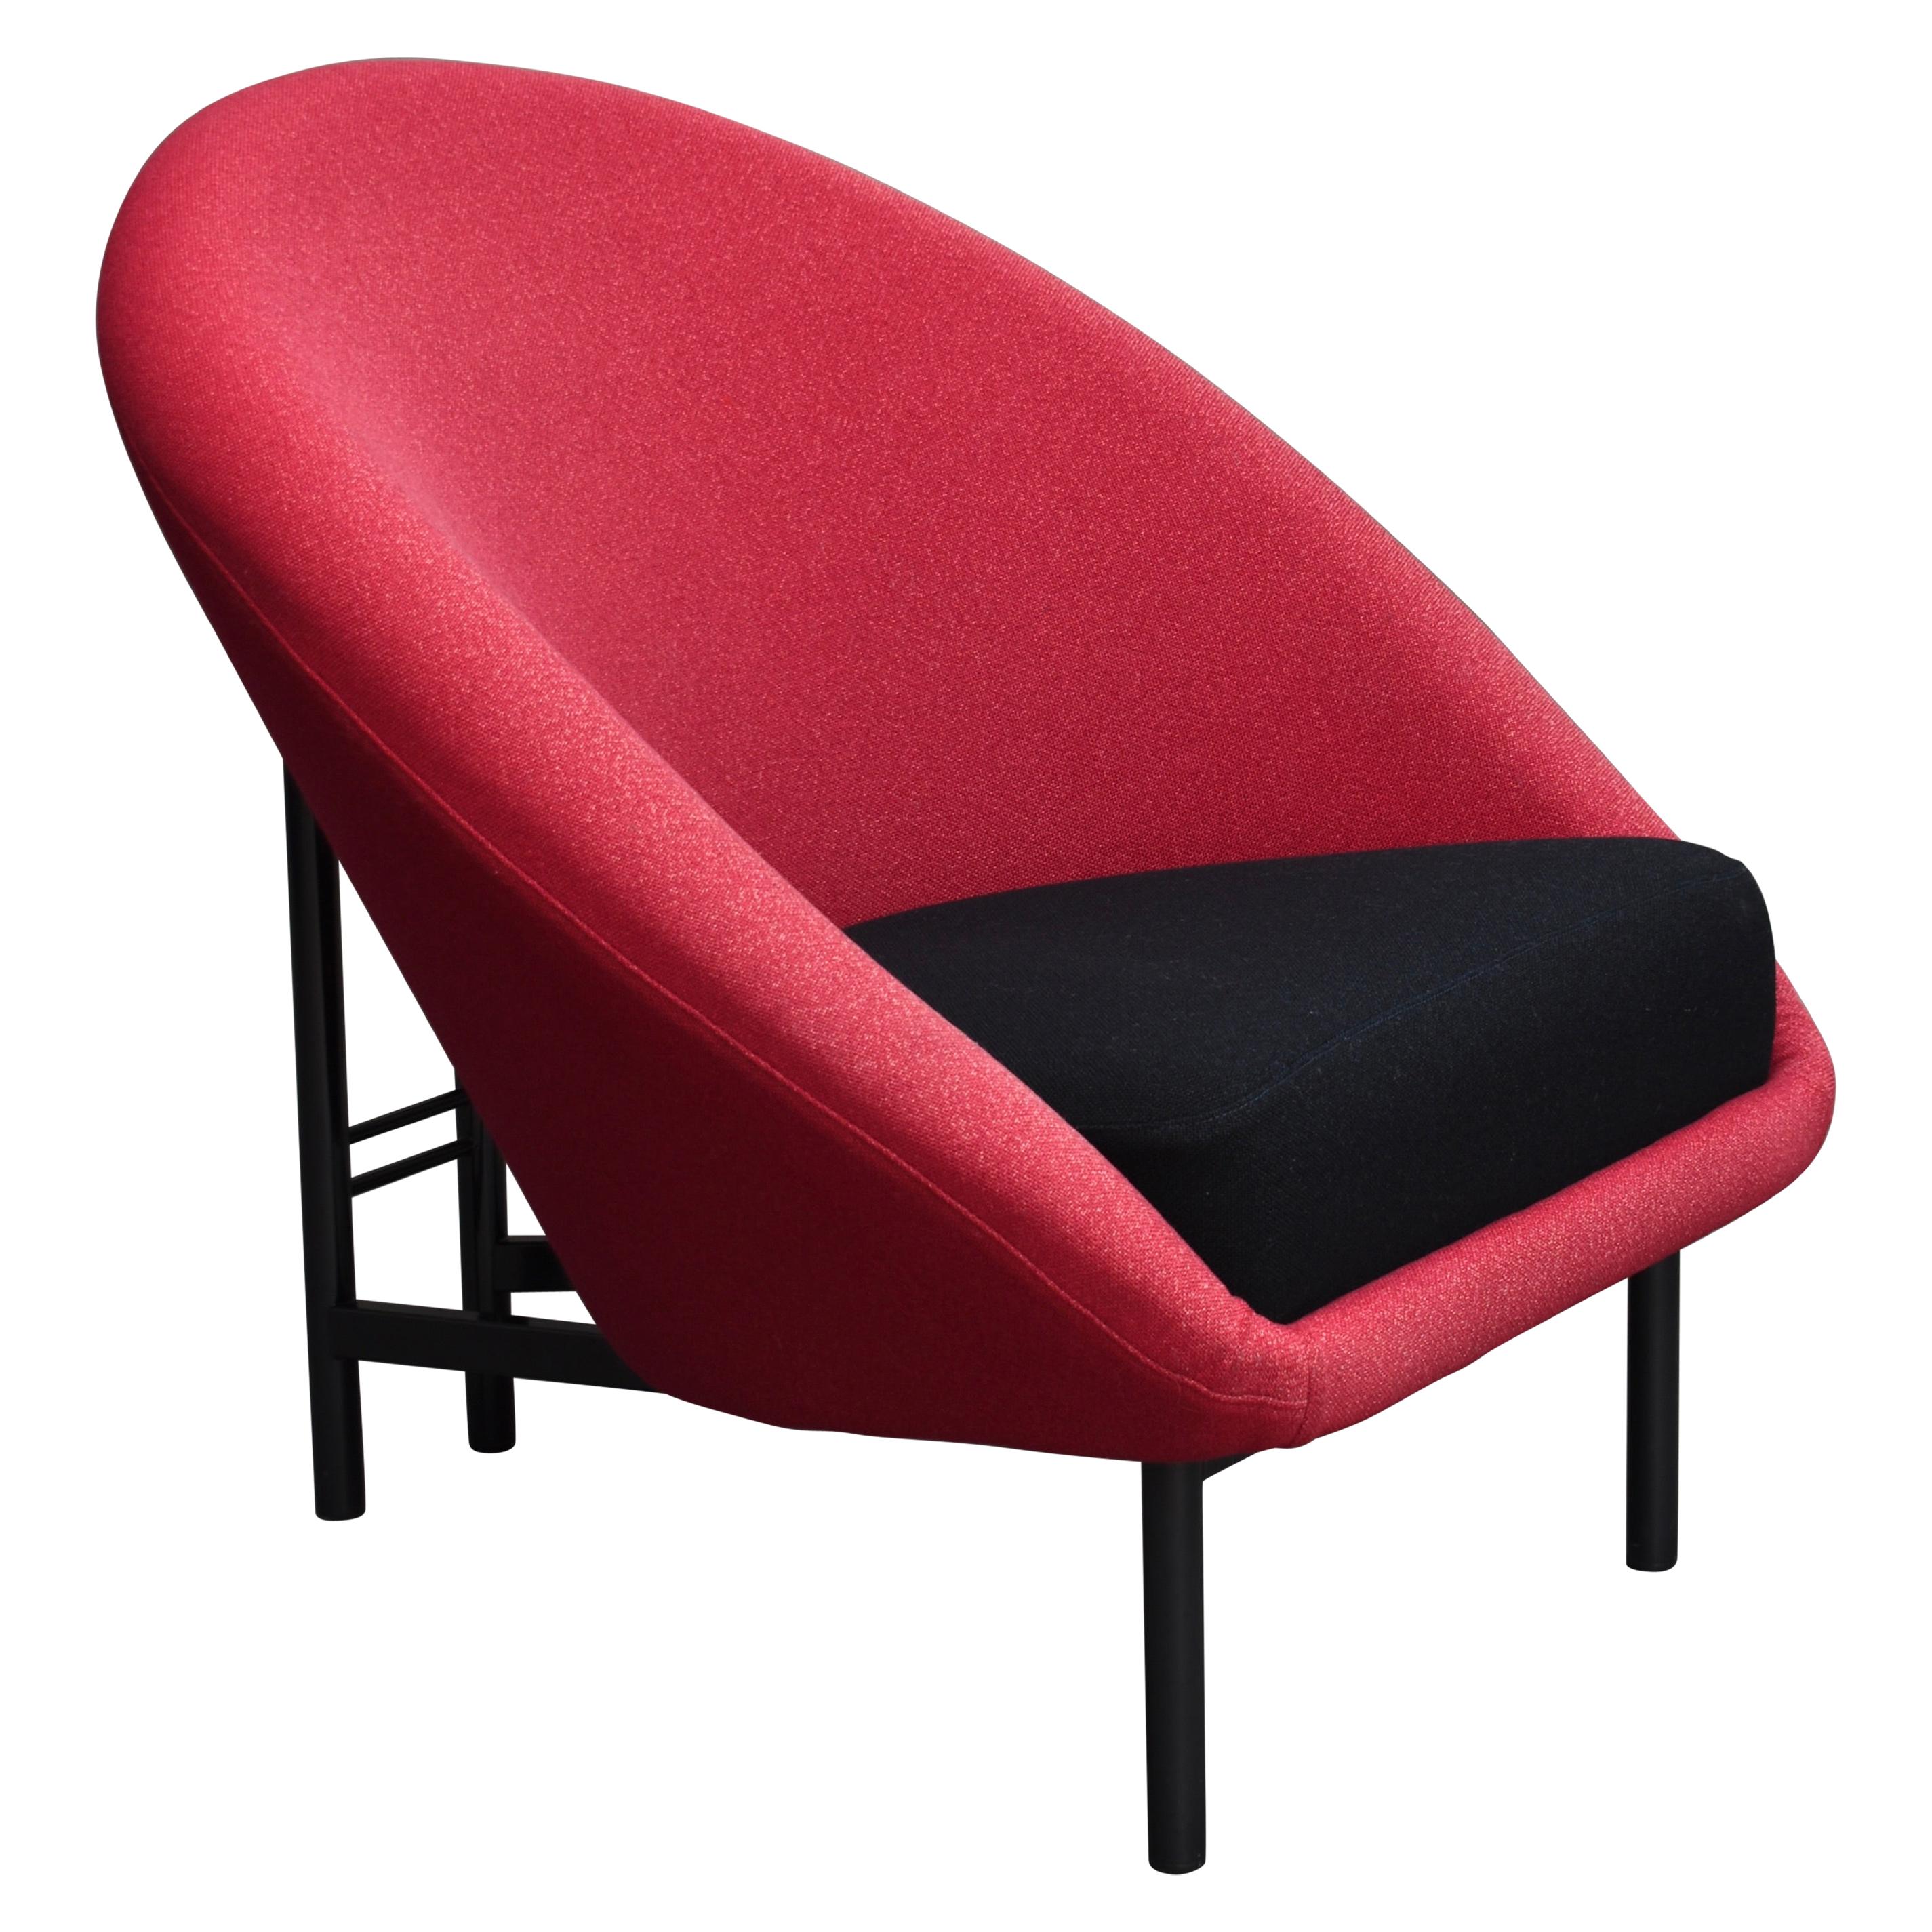 Theo Ruth F815 Armchair by Artifort, Netherlands, 1958